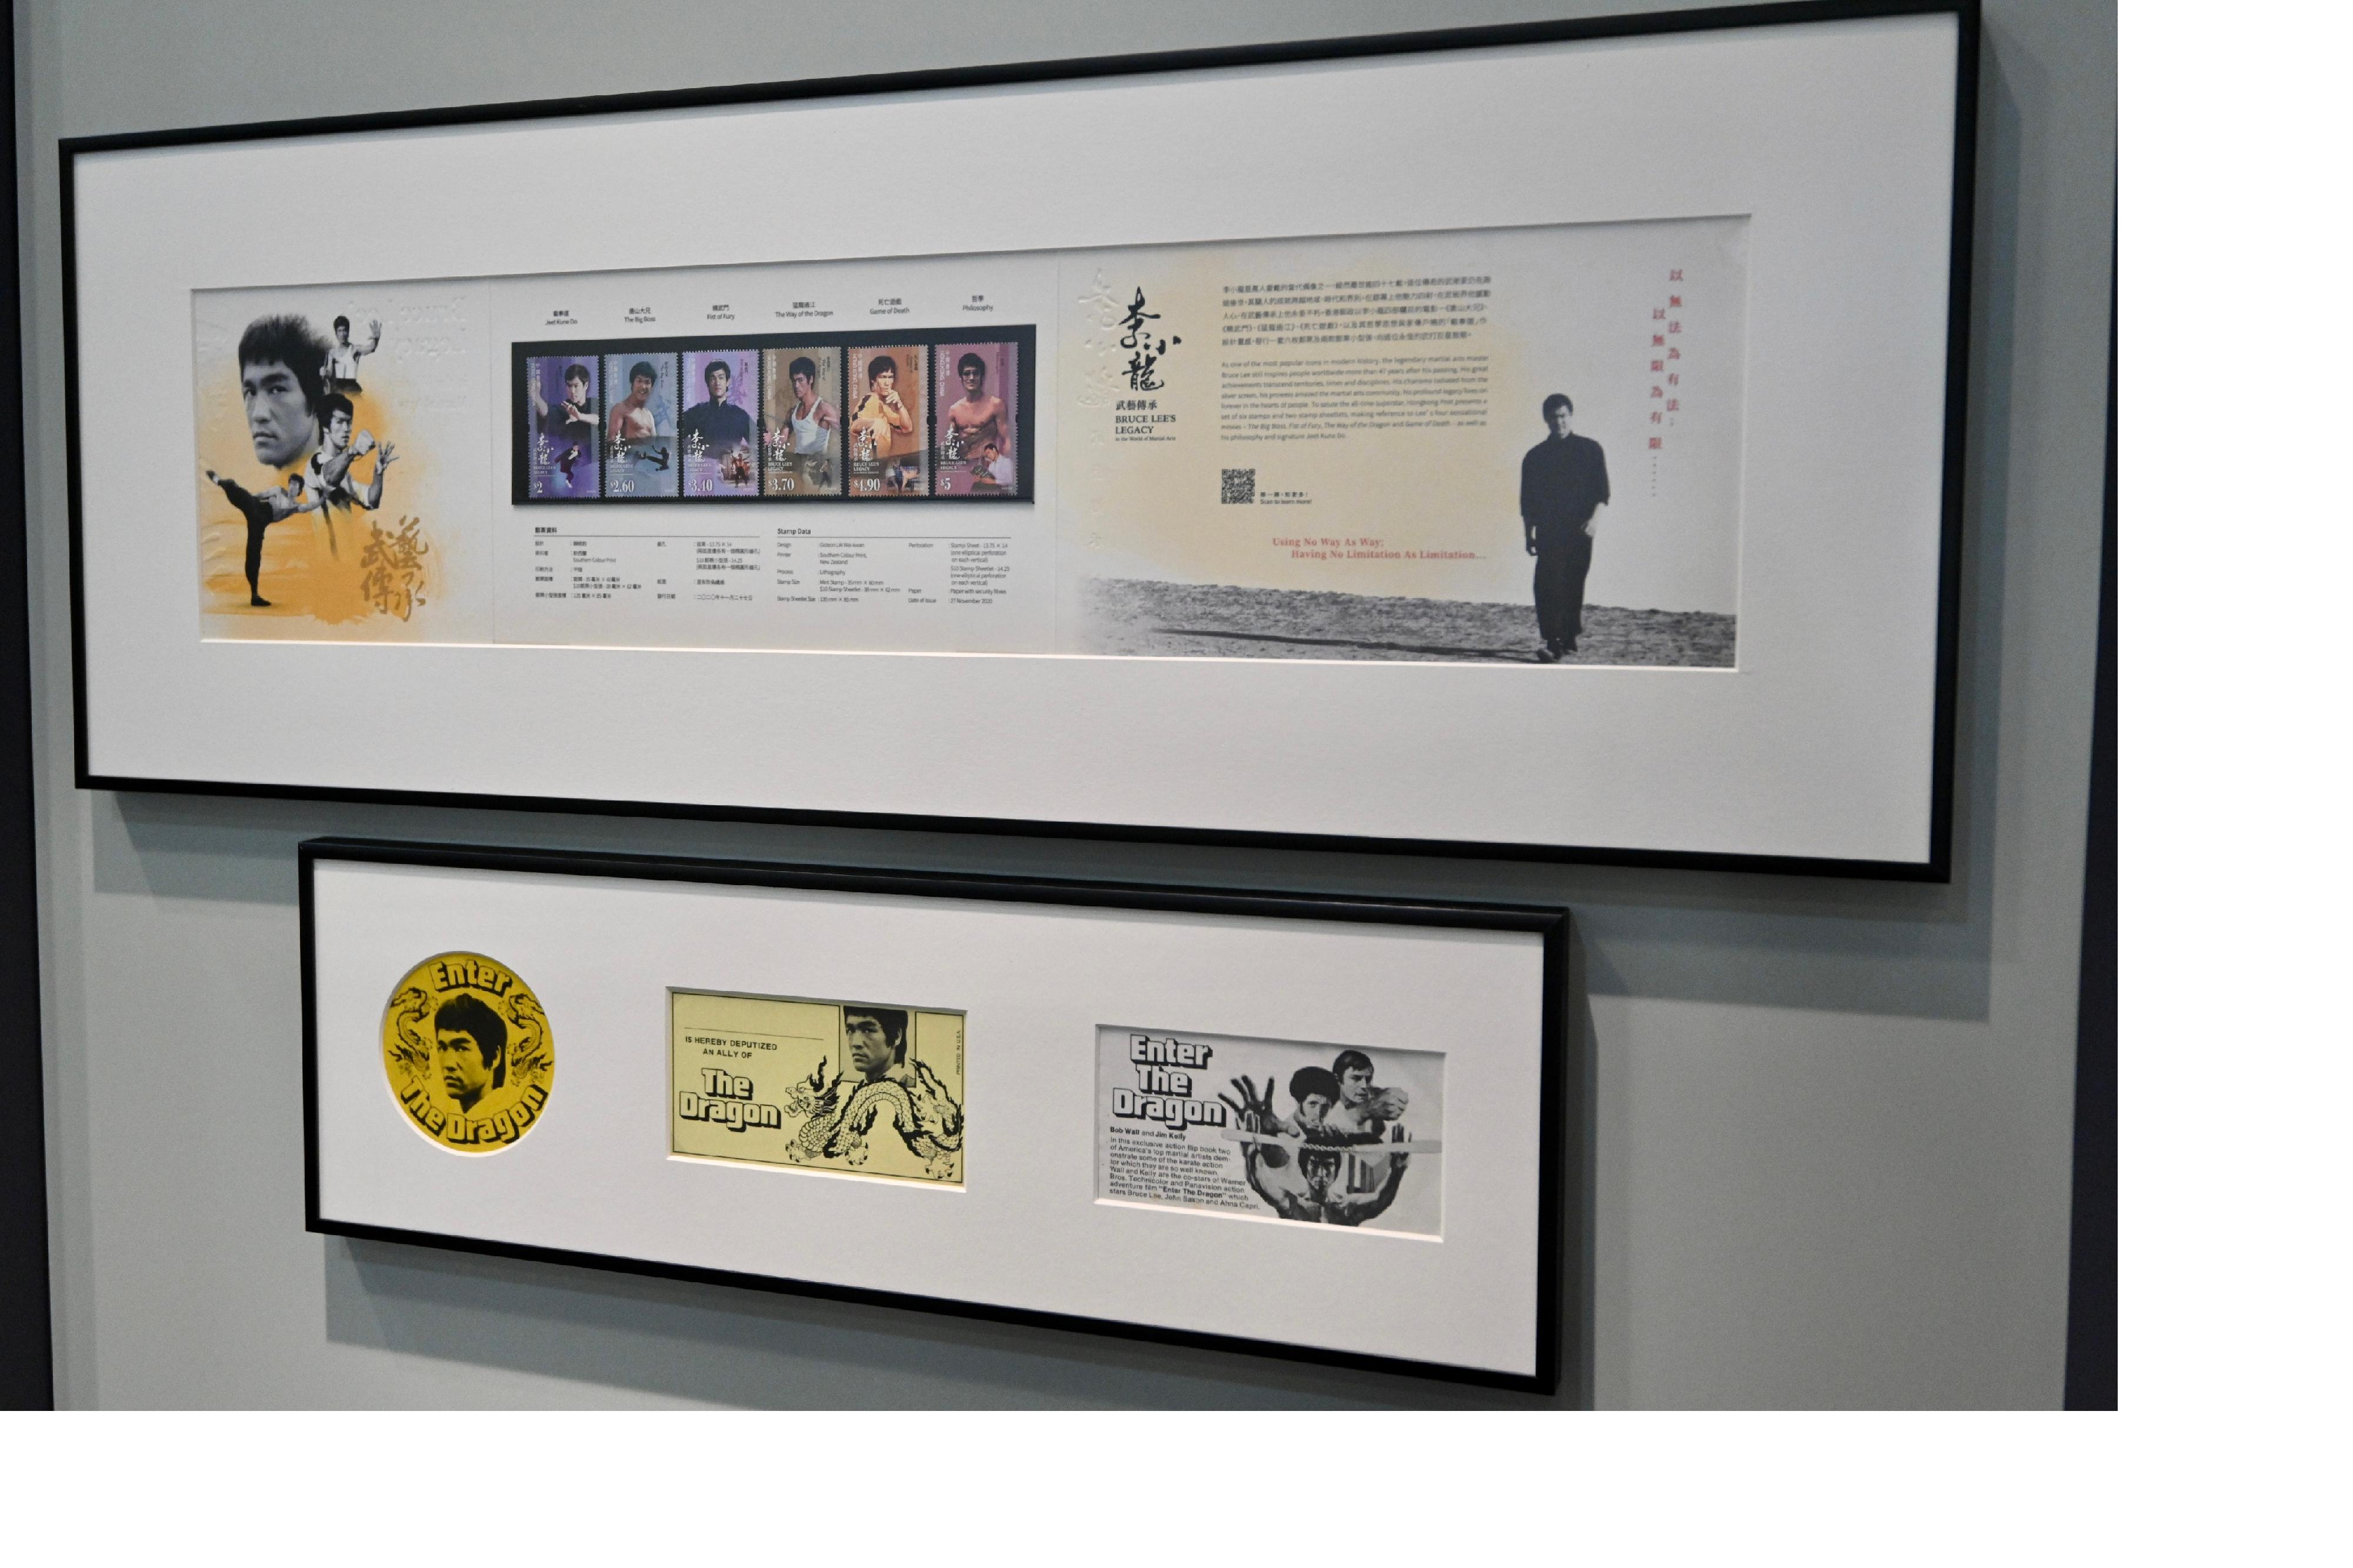 The pop-up display "Bruce Lee: a Timeless Classic" will be open to the public from tomorrow (July 12) at the Hong Kong Heritage Museum. Photo shows a "Bruce Lee's Legacy in the World of Martial Arts" presentation pack.